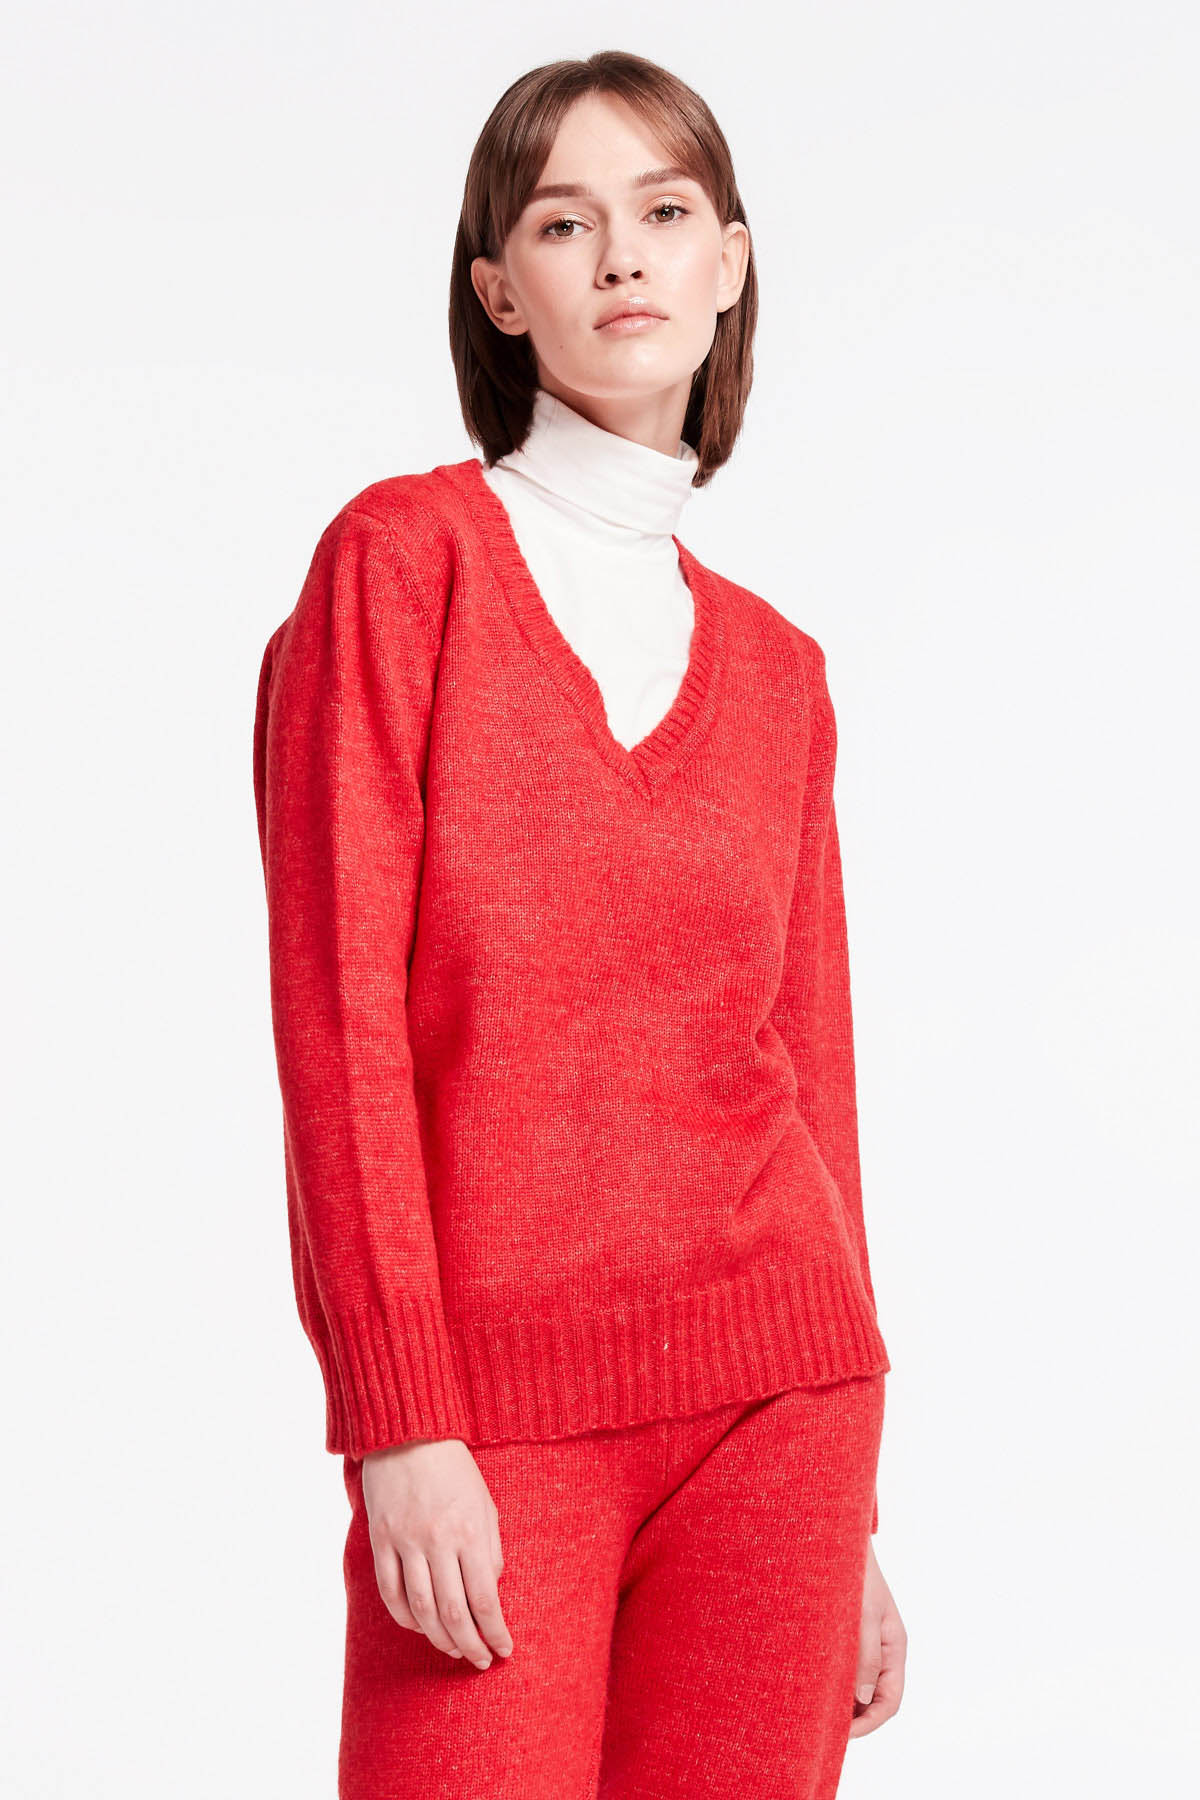 Red V-neck sweater, photo 1